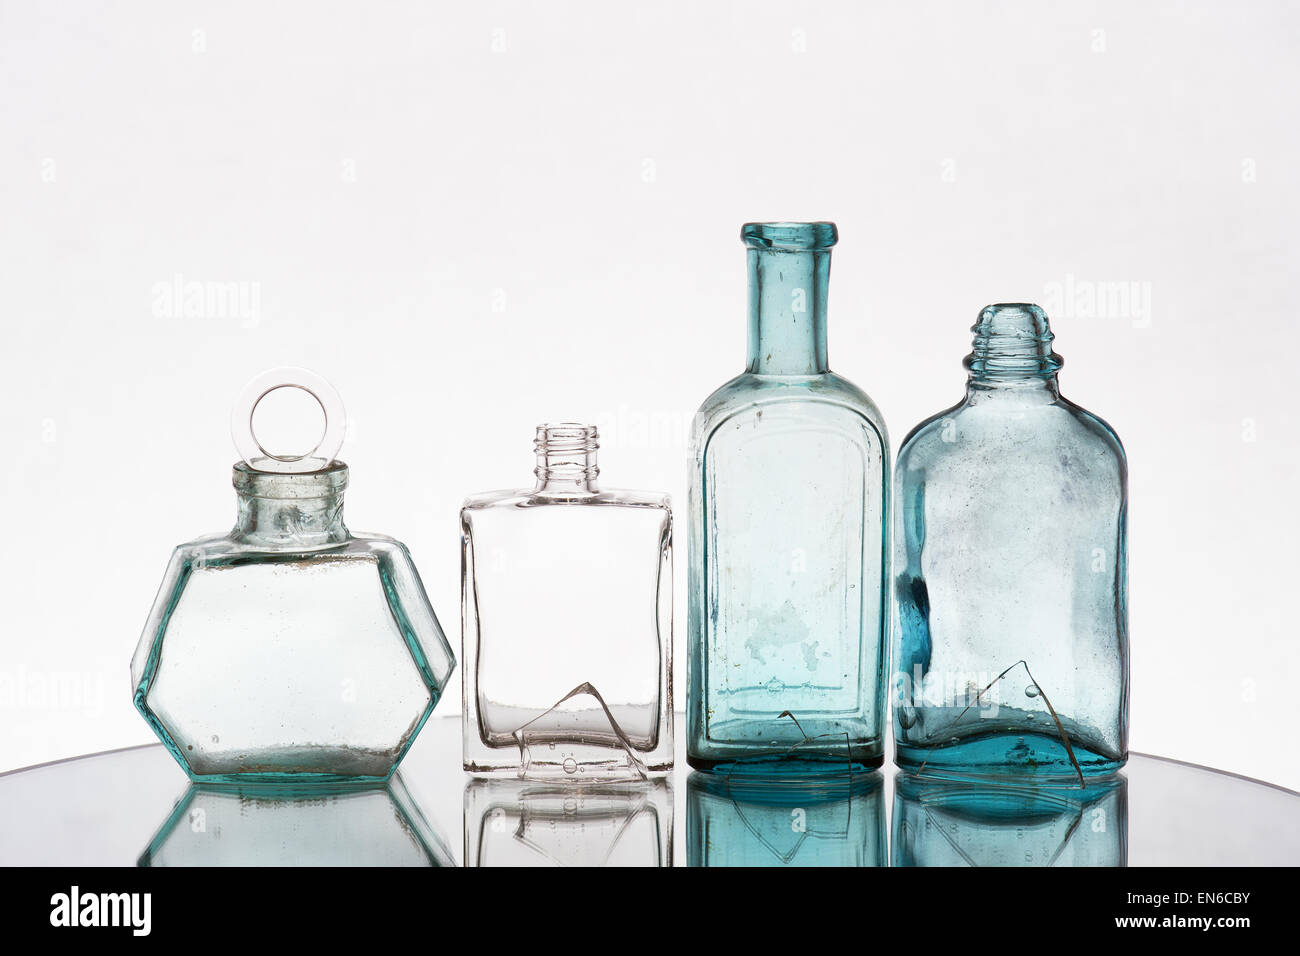 Composition of various vintage bottles and shards of glass on the light background Stock Photo